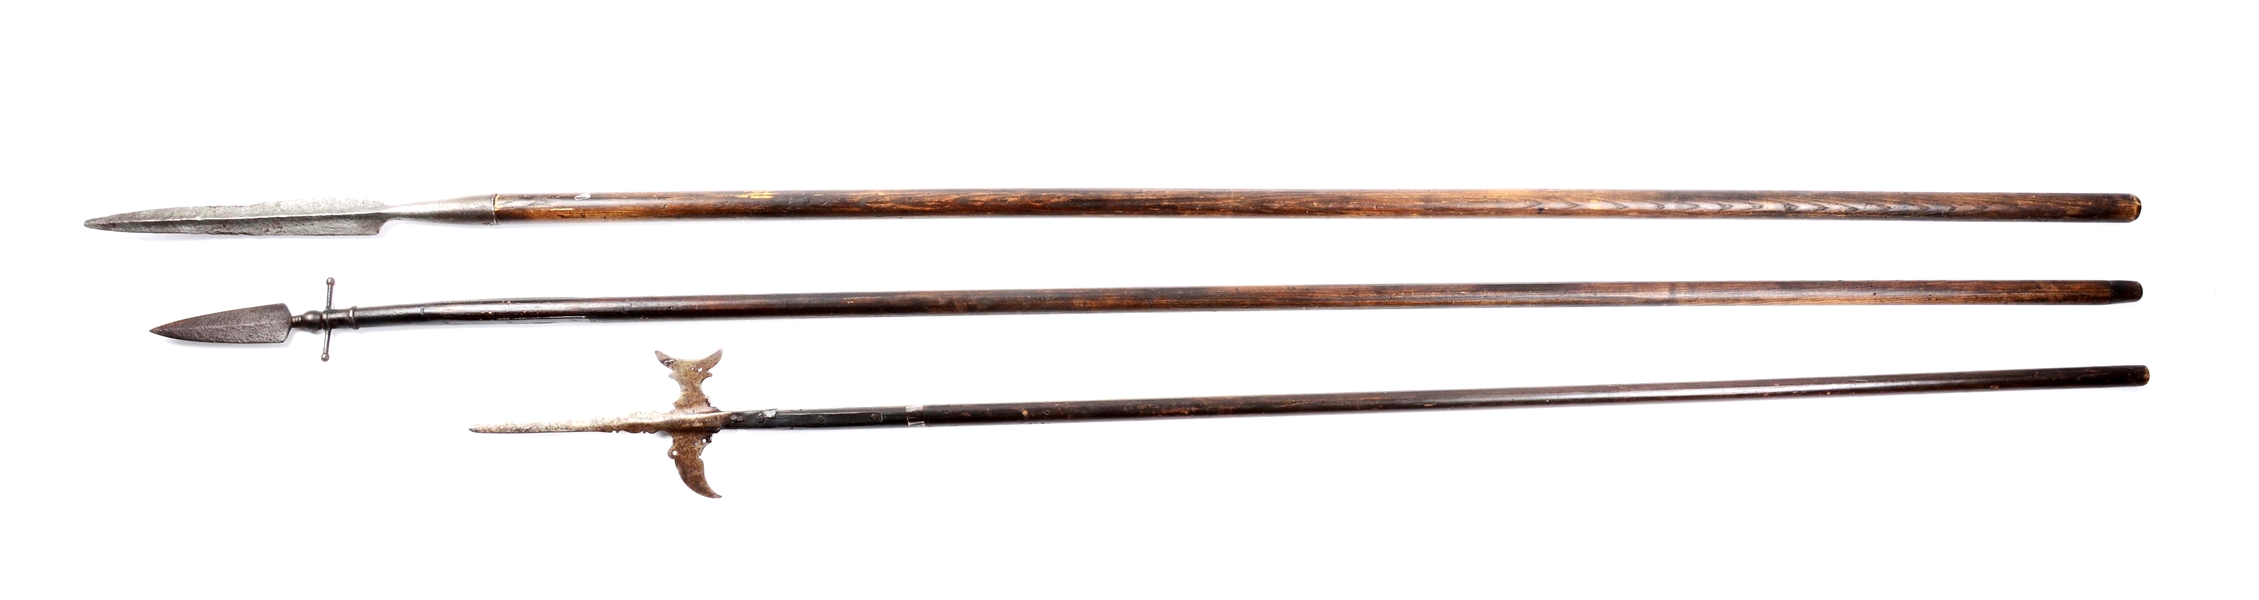 LOT OF 3: 18TH CENTURY POLEARMS.